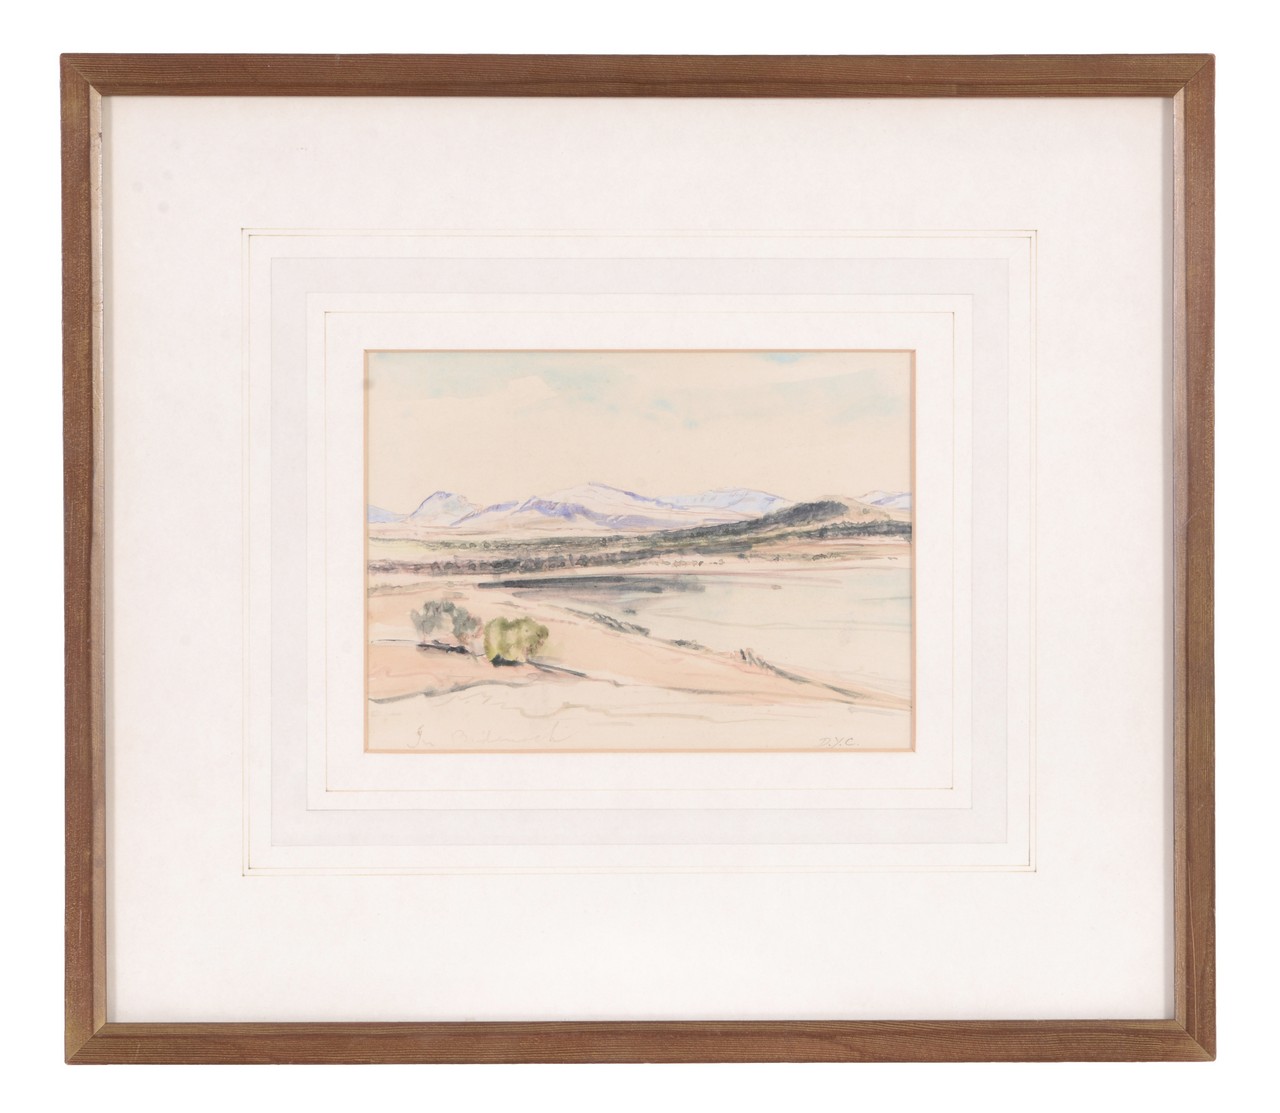 David Young Cameron (1865-1945) In Badenoch Watercolour over graphite Inscribed title lower left, - Image 3 of 3